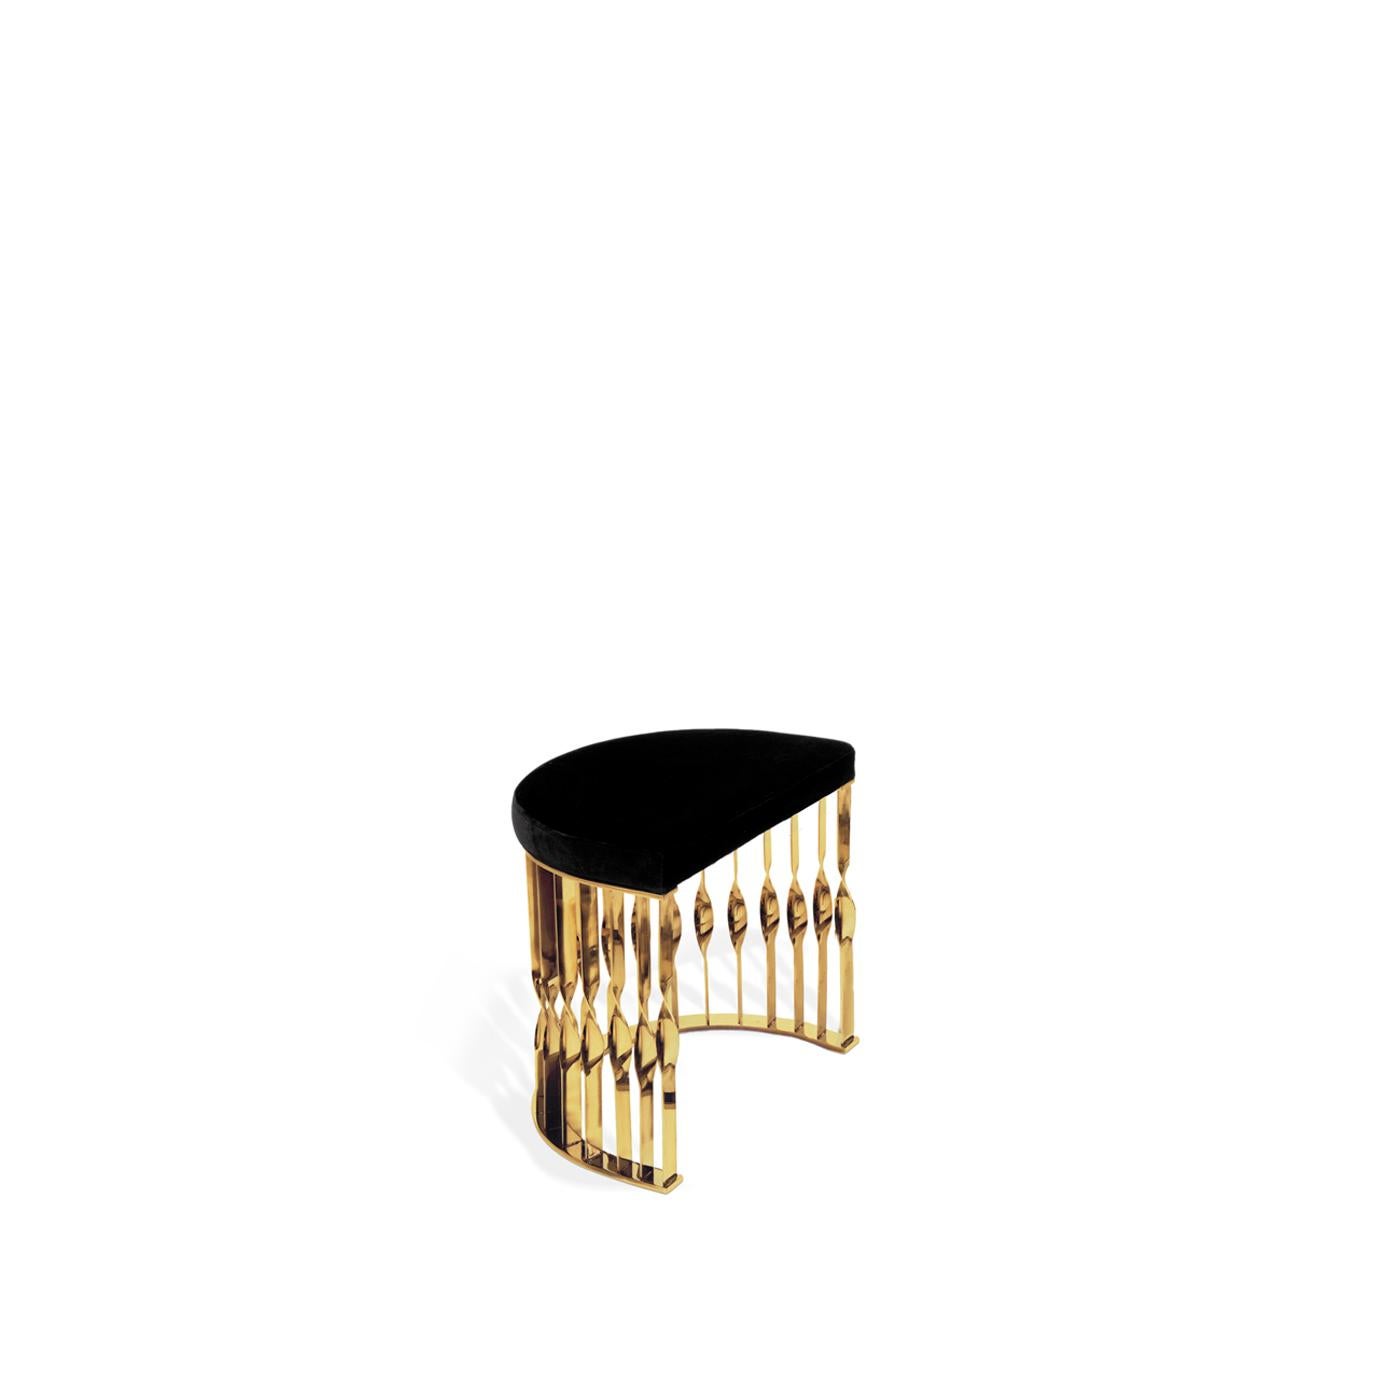 This fluid and unusual stool transcend design and jewellery. Conceived from a cuff bracelet, the Mandy stool will embellish any setting with its soft black velvet upholstery and a base in twisted high-gloss polished brass.